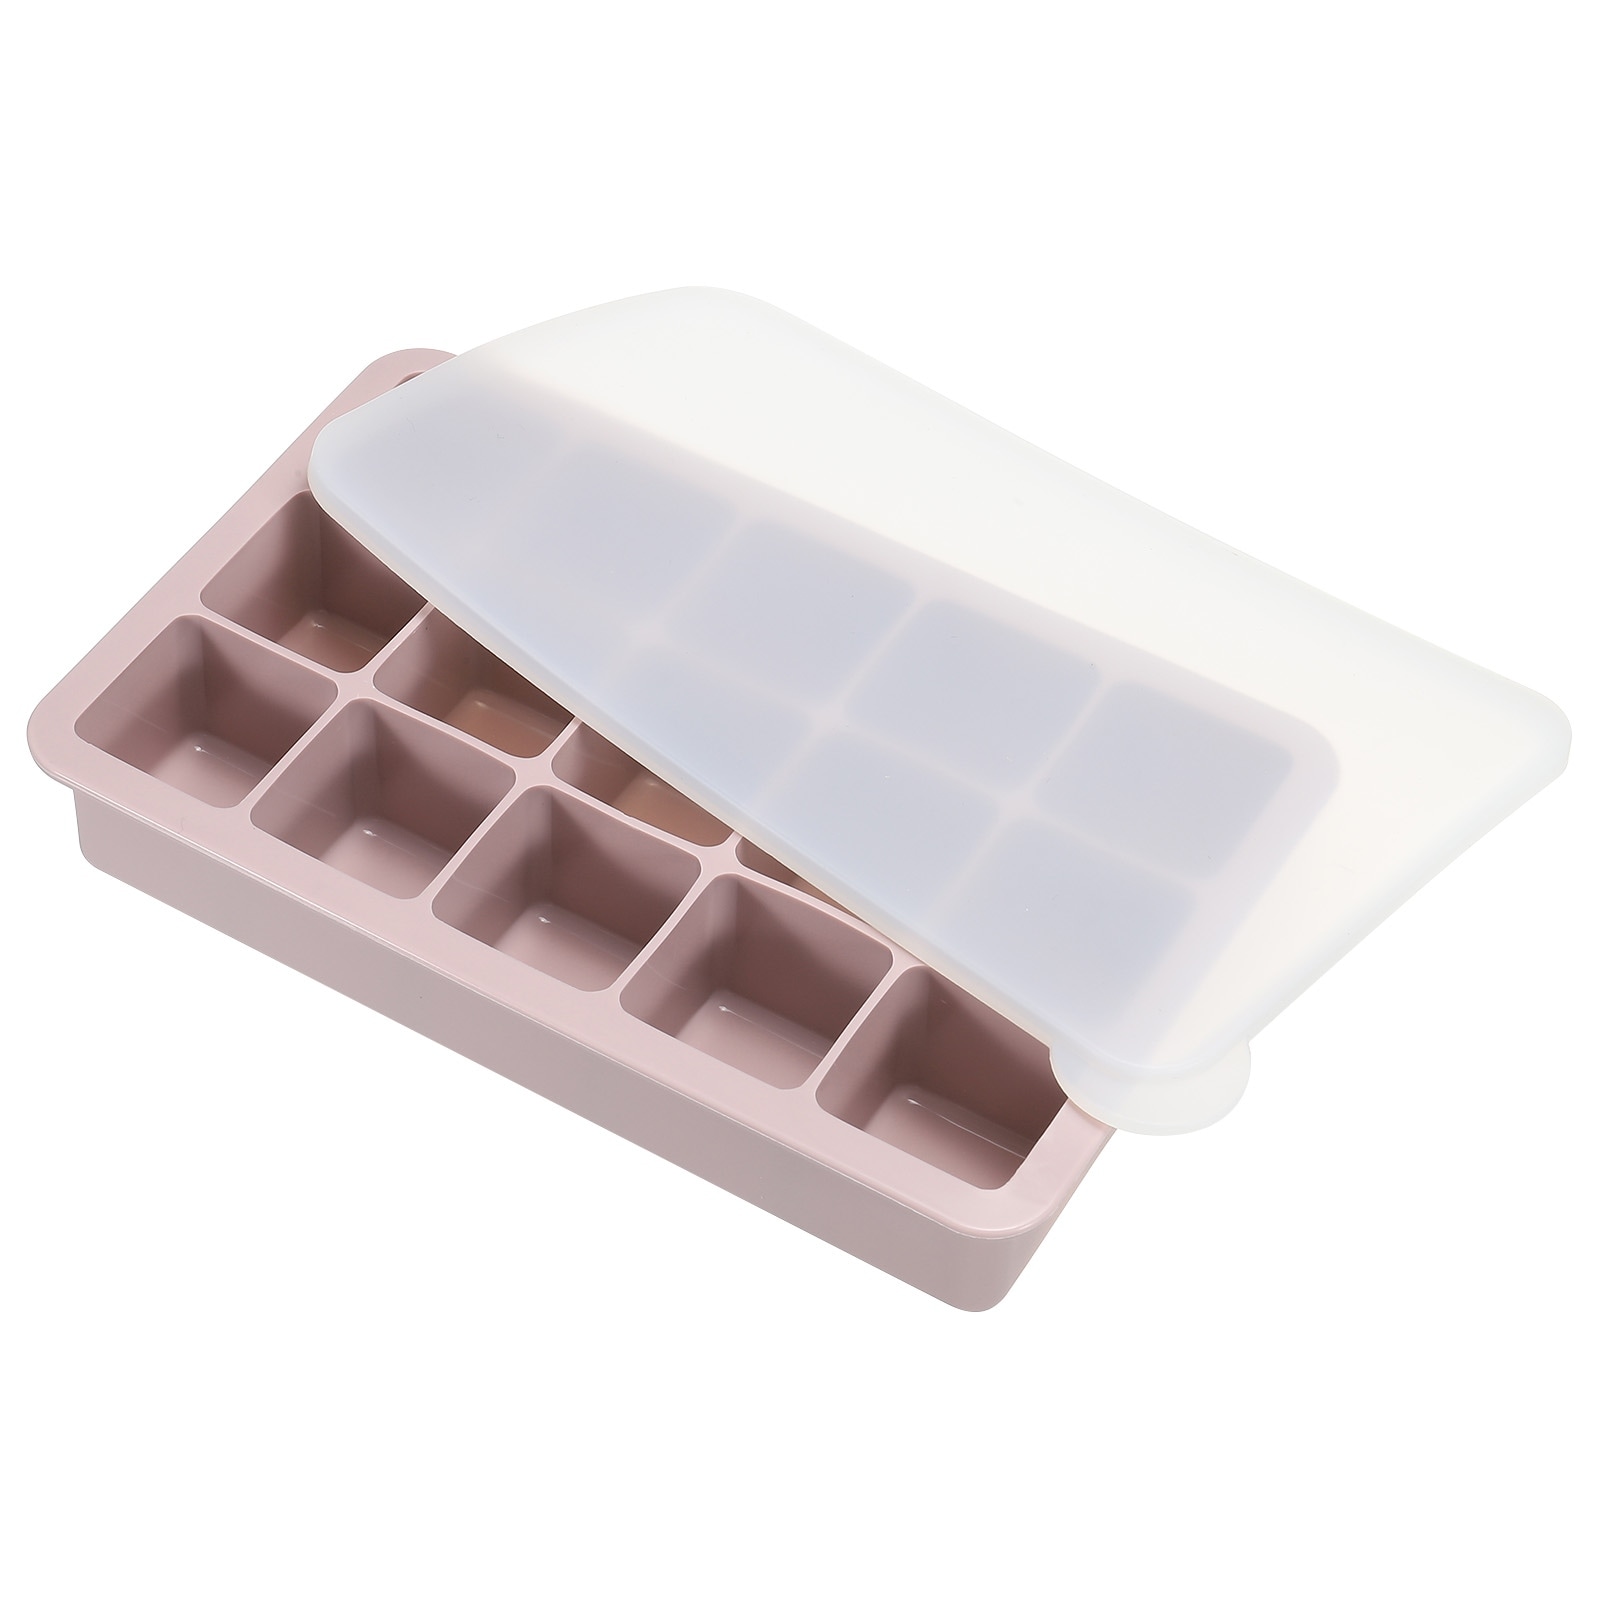 https://ak1.ostkcdn.com/images/products/is/images/direct/b38bcf2f3ab3ac5c836f9dba540a1db1b31255d6/Ice-Cube-Mold-15-Grid-Ice-Cube-Tray-with-Lid%28Pink%29.jpg